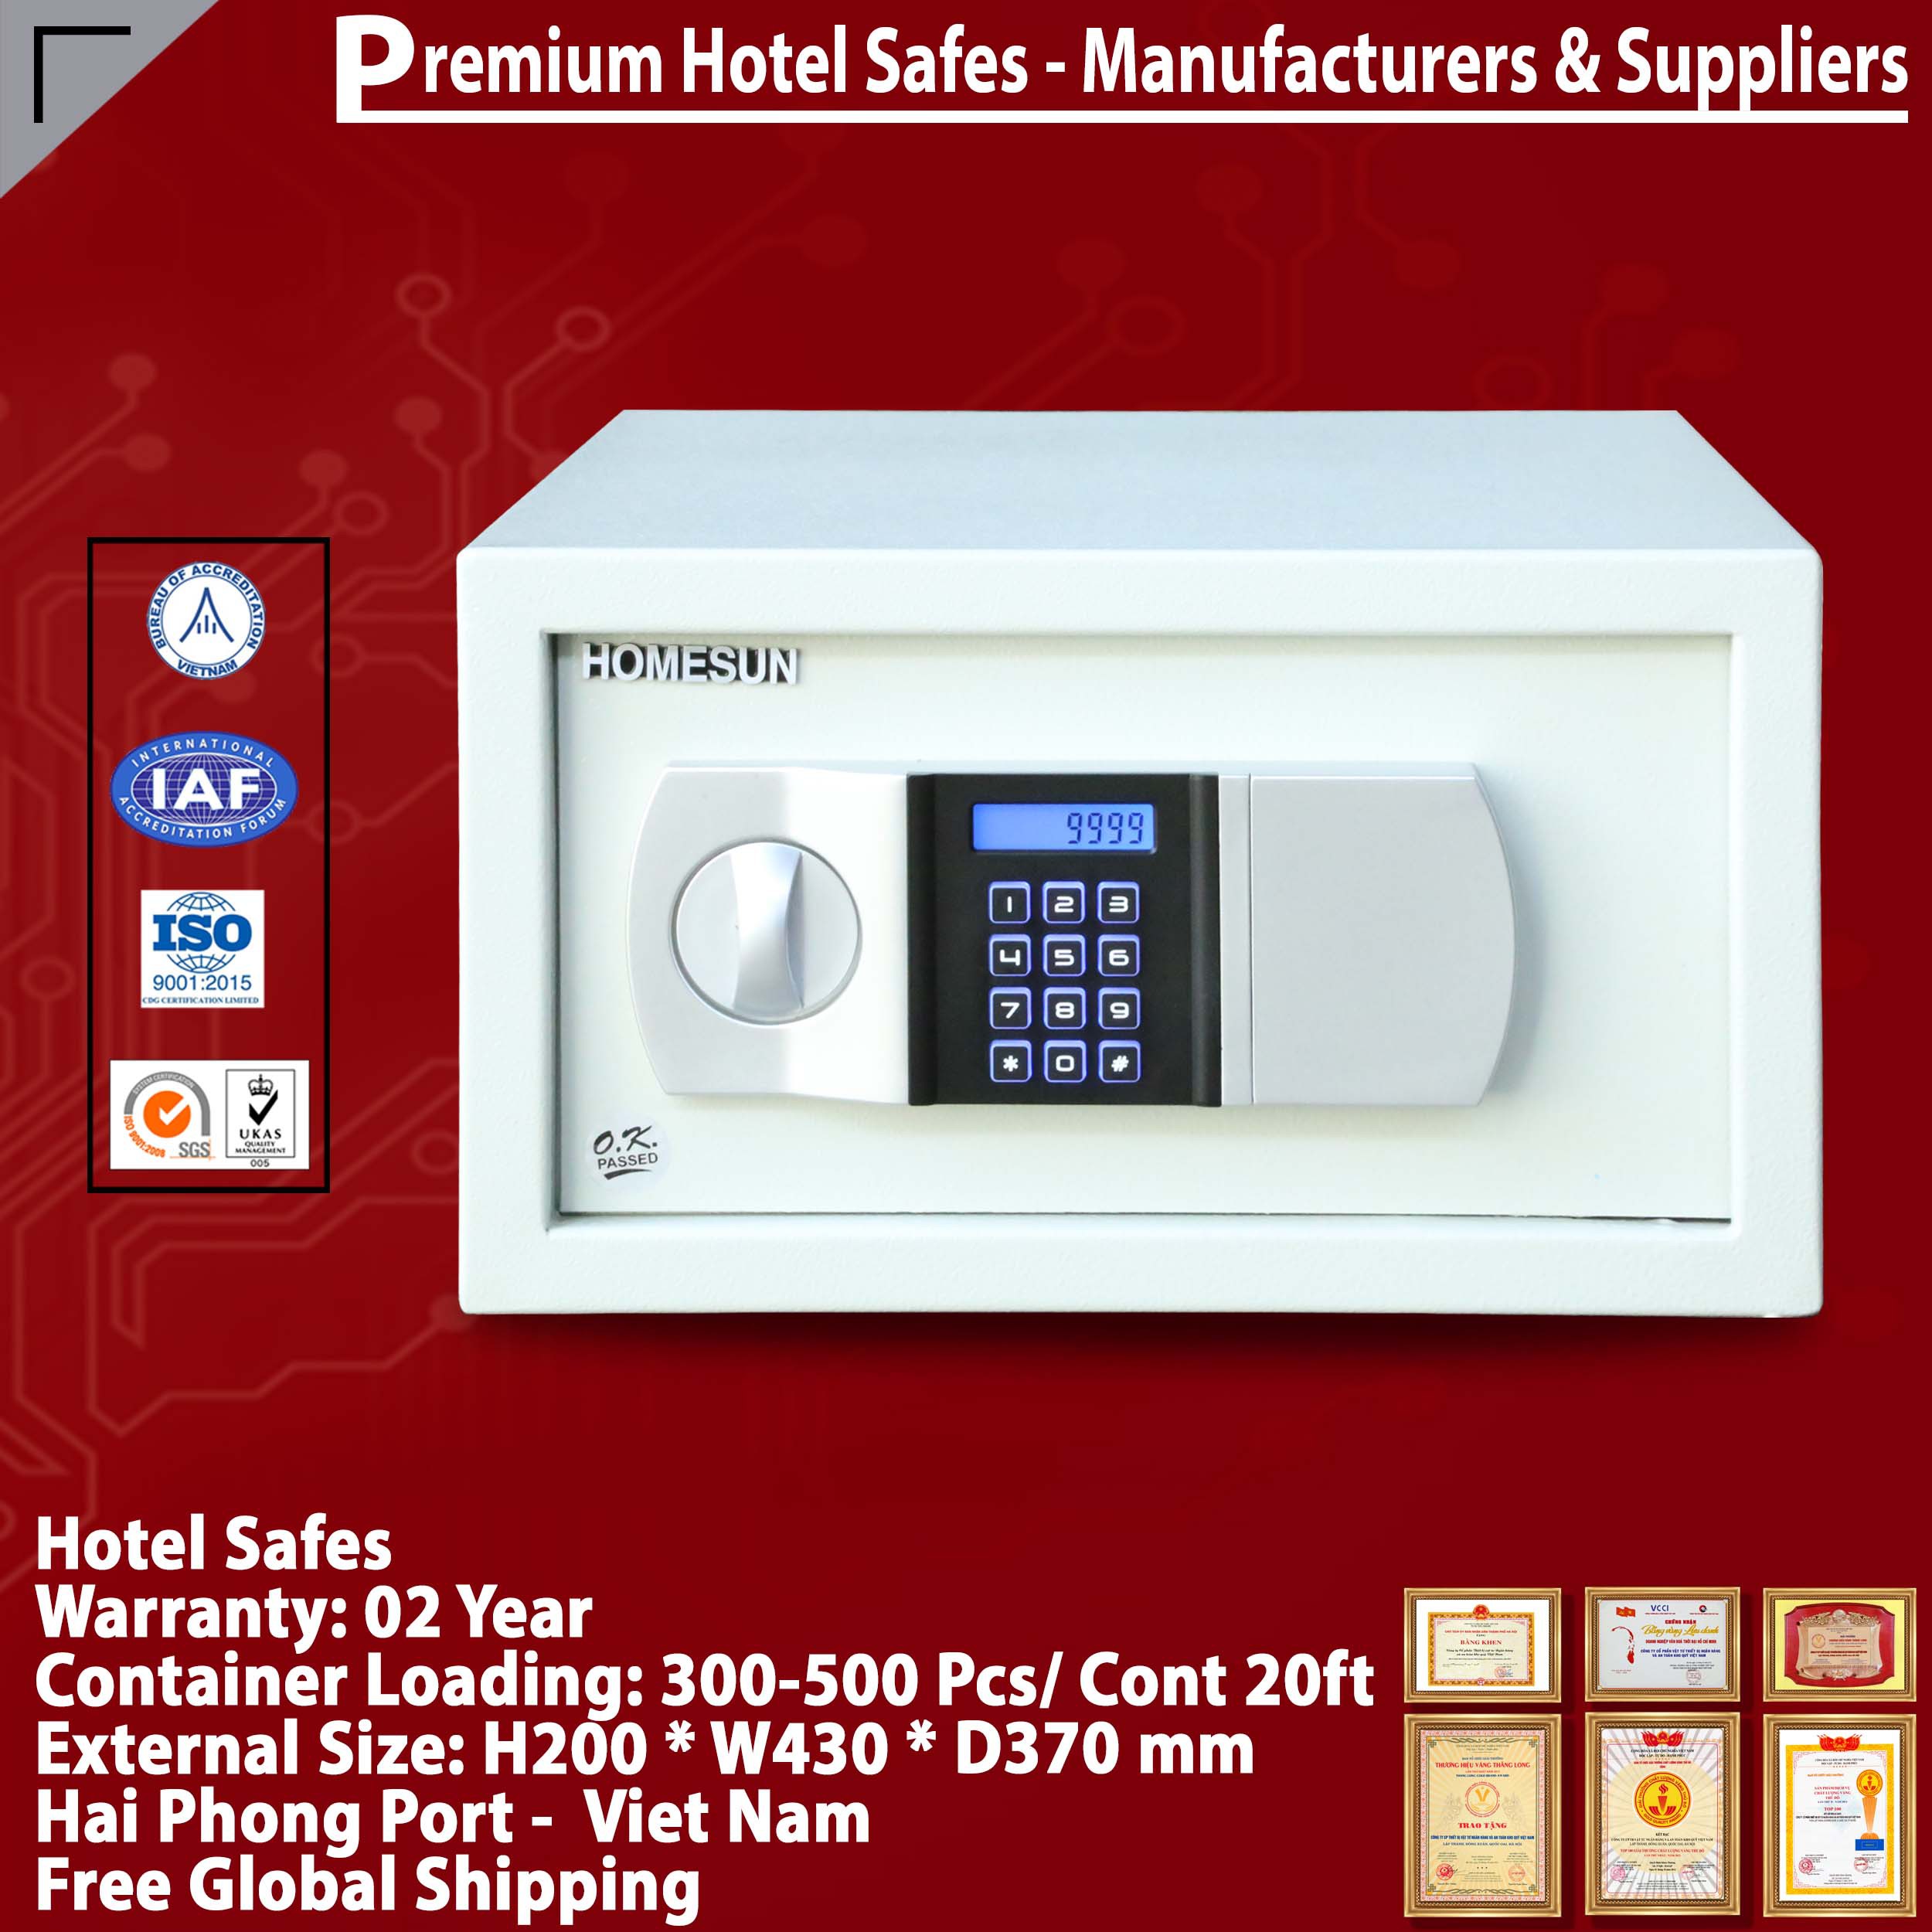 Buy Best Sellers In Hotel SafesFactory Direct & Fast Shipping‎, Safes For Hotels From Ireland's